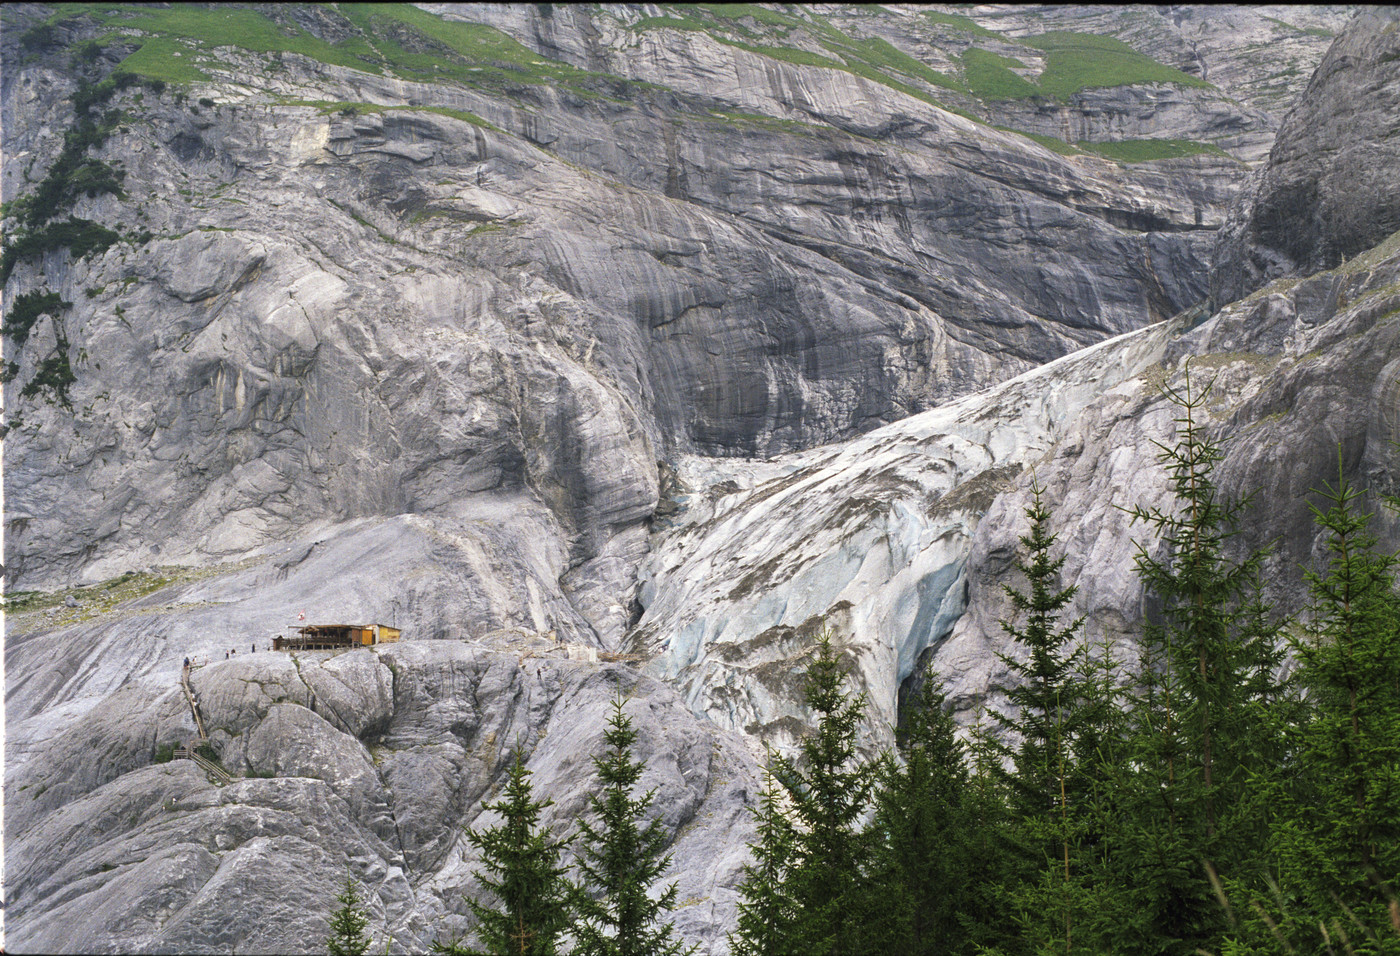 Tongue of the Oberer Grindelwaldgletscher in 1998 with entrance to the ice cave